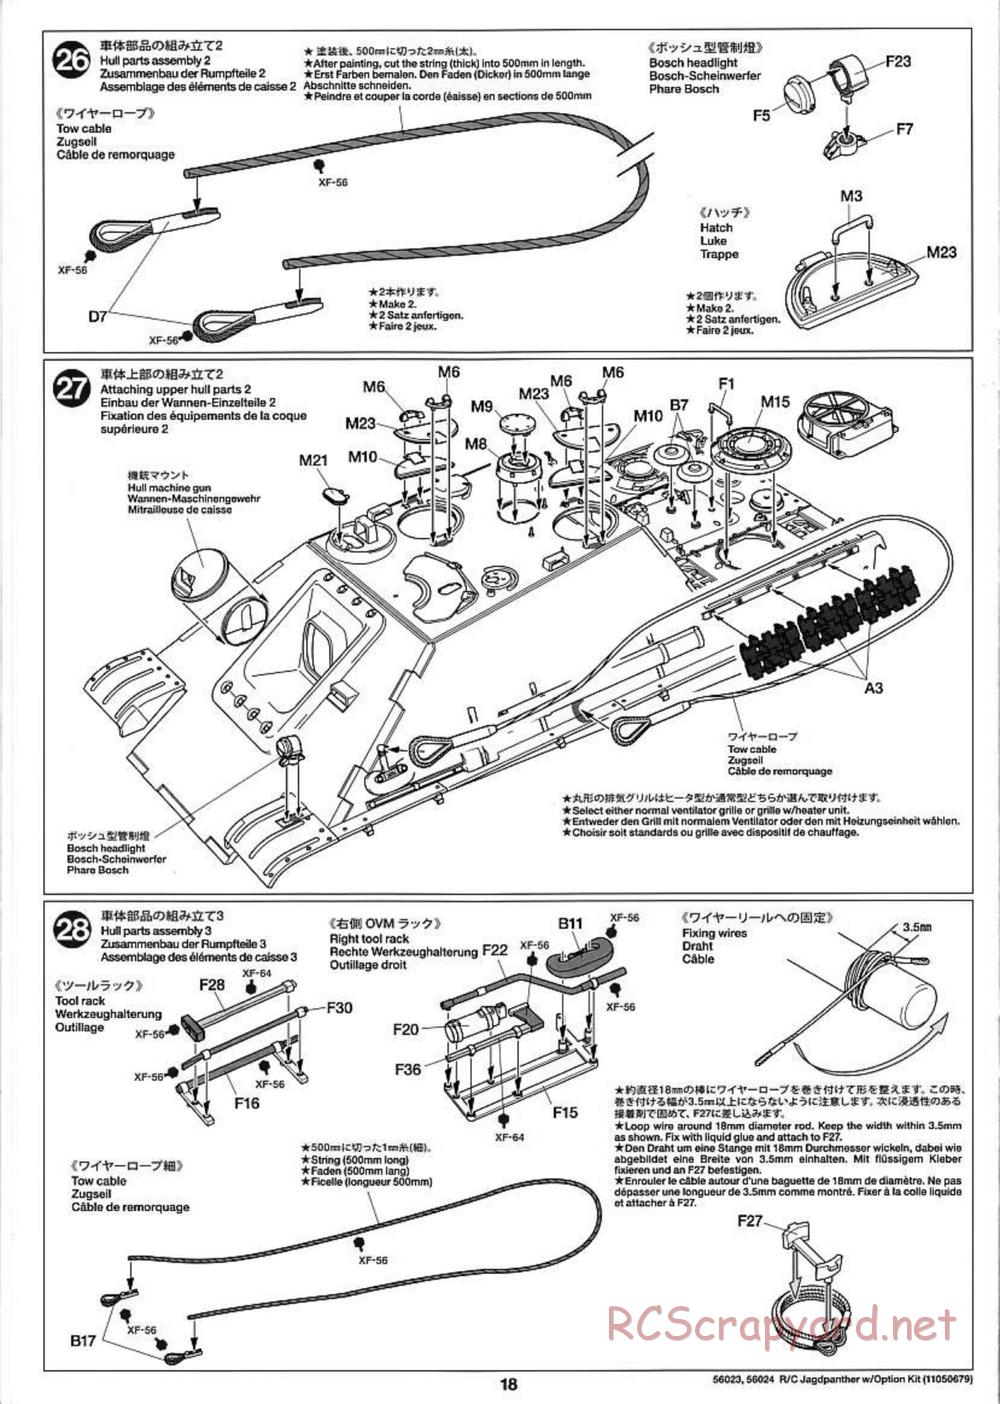 Tamiya - Jagdpanther - 1/16 Scale Chassis - Manual - Page 18